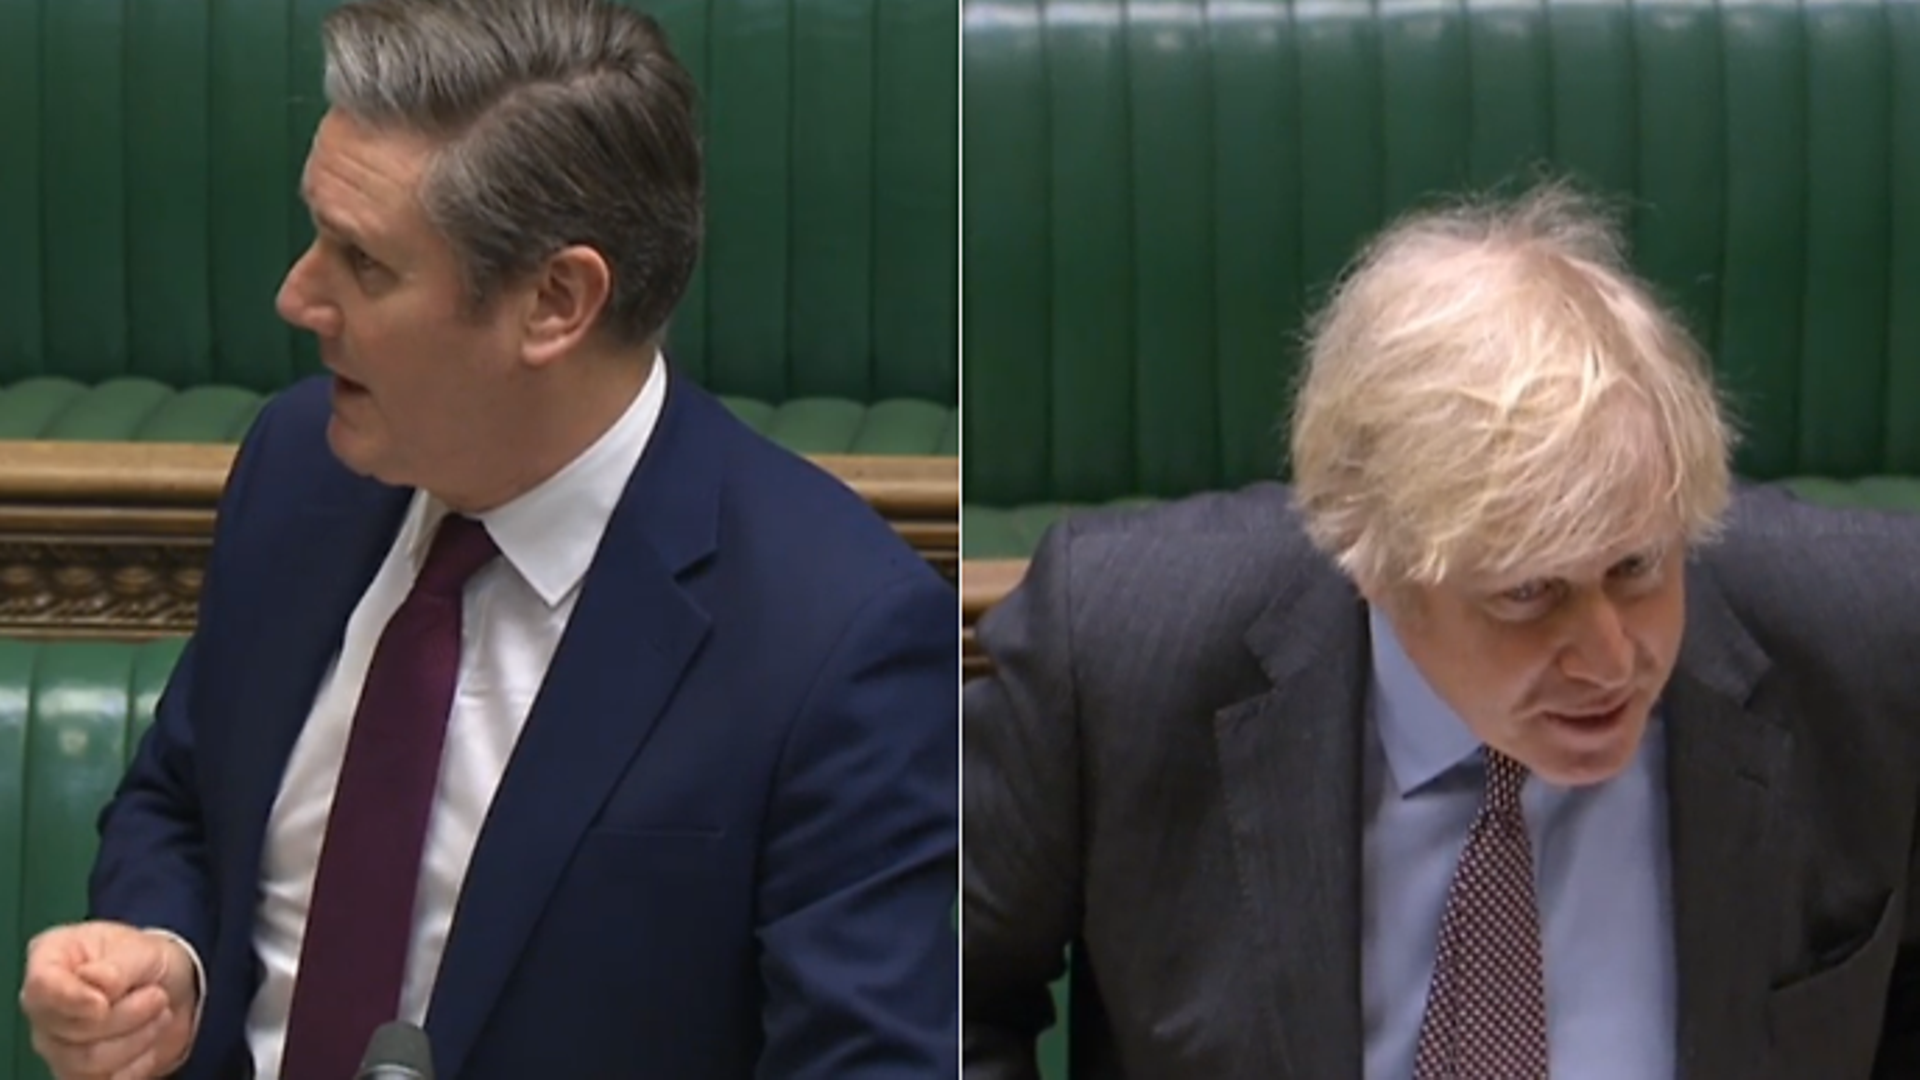 Sir Keir Starmer (L) and Boris Johnson during Prime Minister's Questions - Credit: Parliamentlive.tv